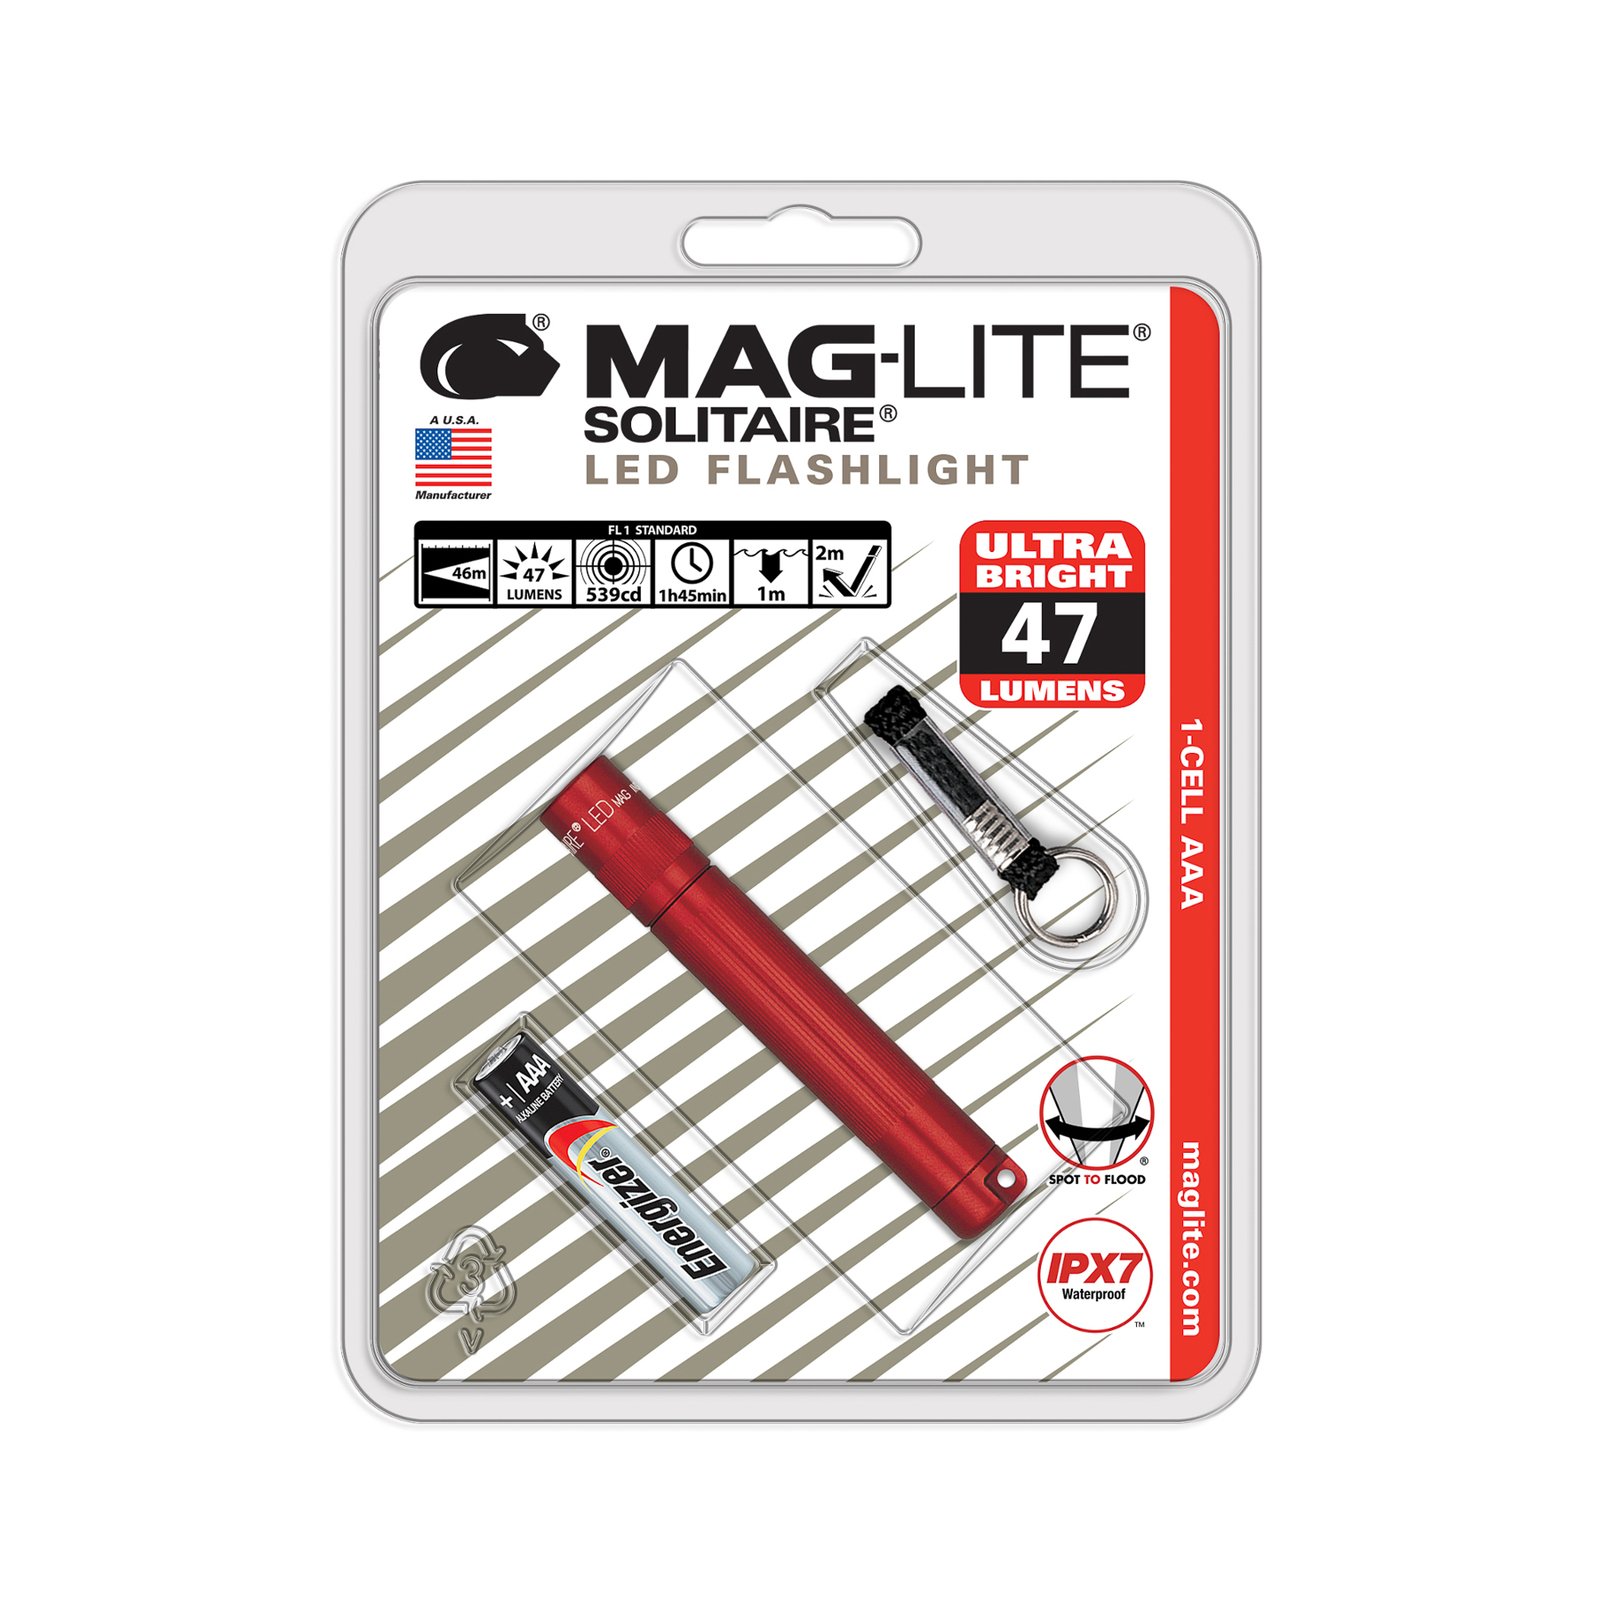 Maglite LED-ficklampa Solitaire, 1-cell AAA, röd